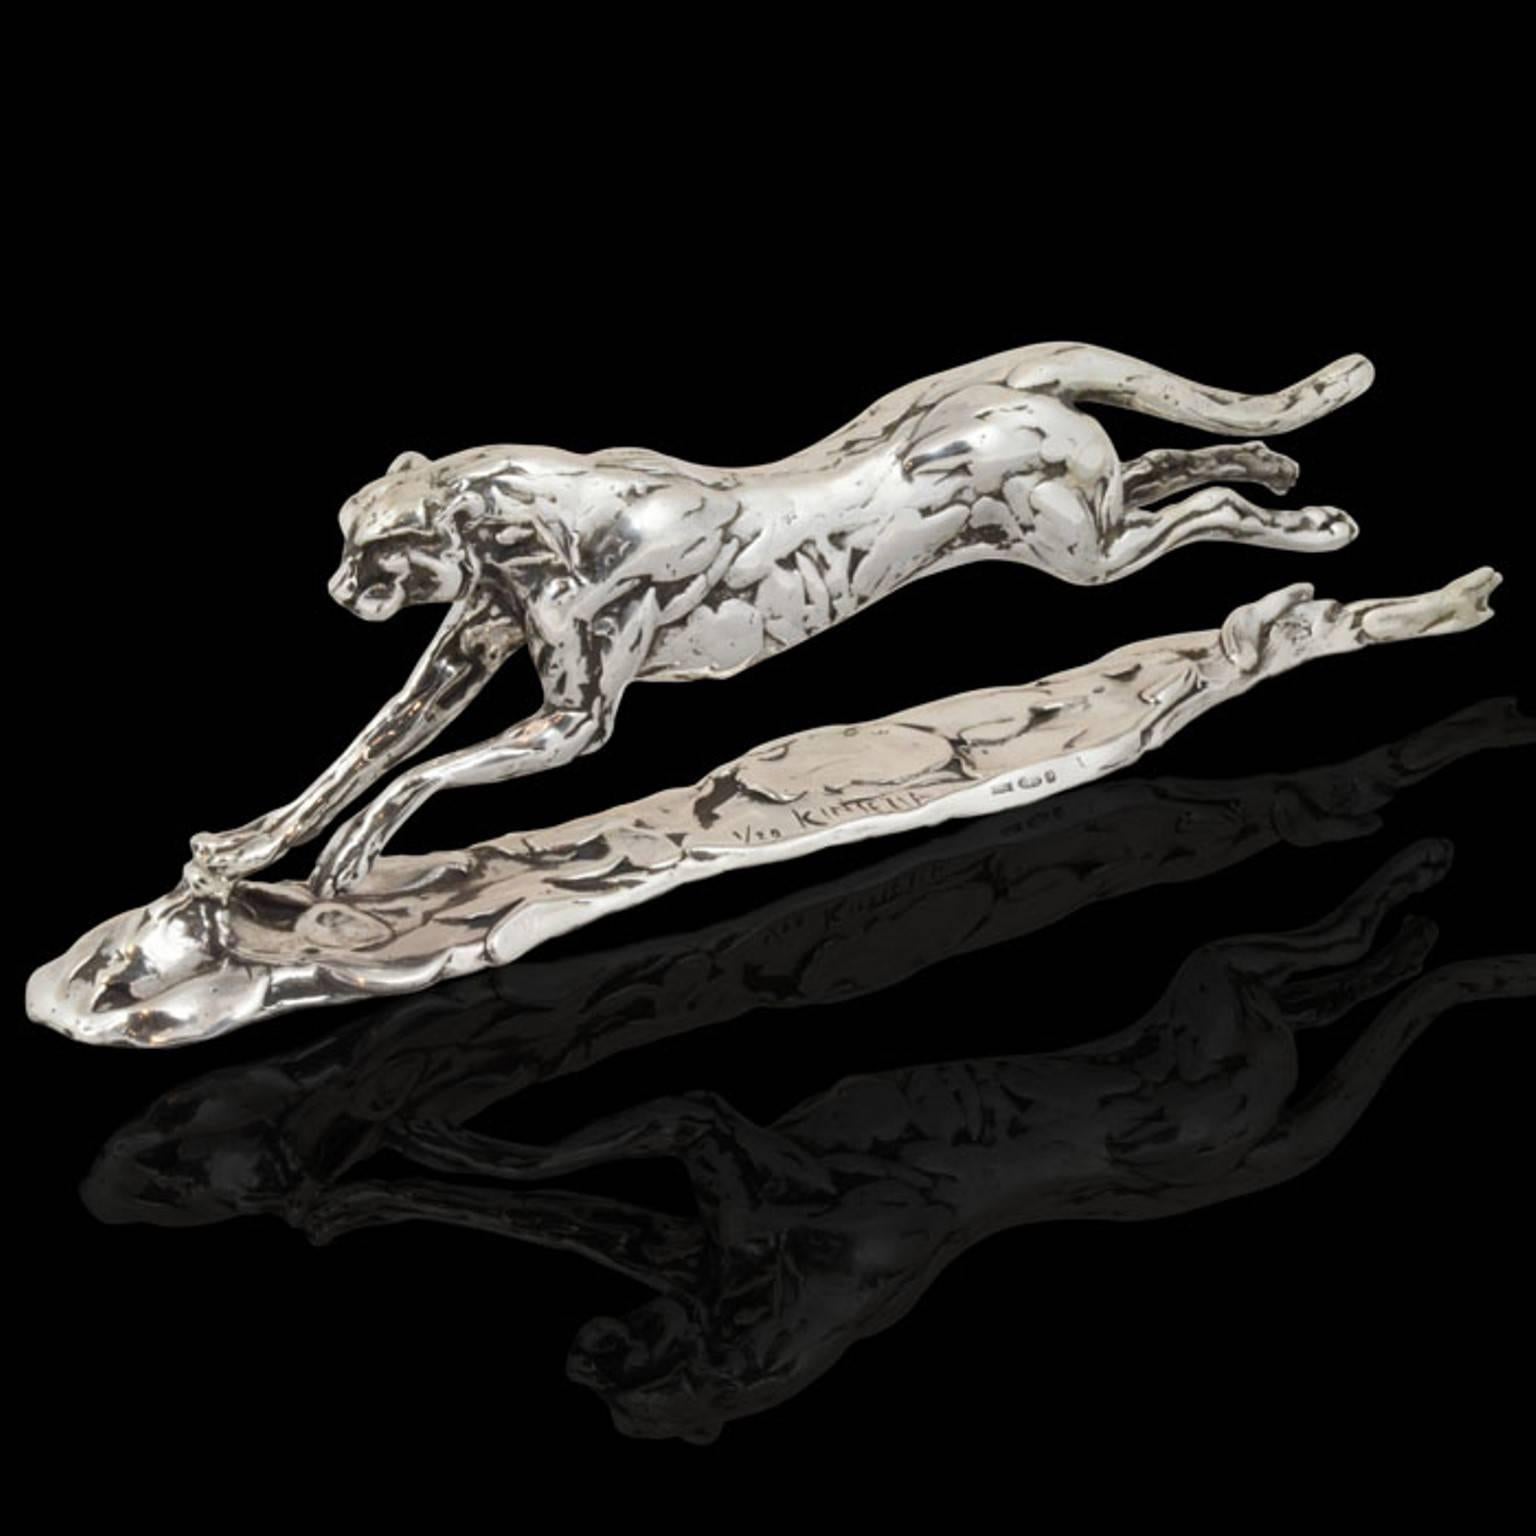 The limited edition finely modelled cheetah racing across the ground at full speed, his head and front legs stretched forward and his back legs and tail flying out behind him.  His body at full stretch creates a graceful and streamlined figure. He